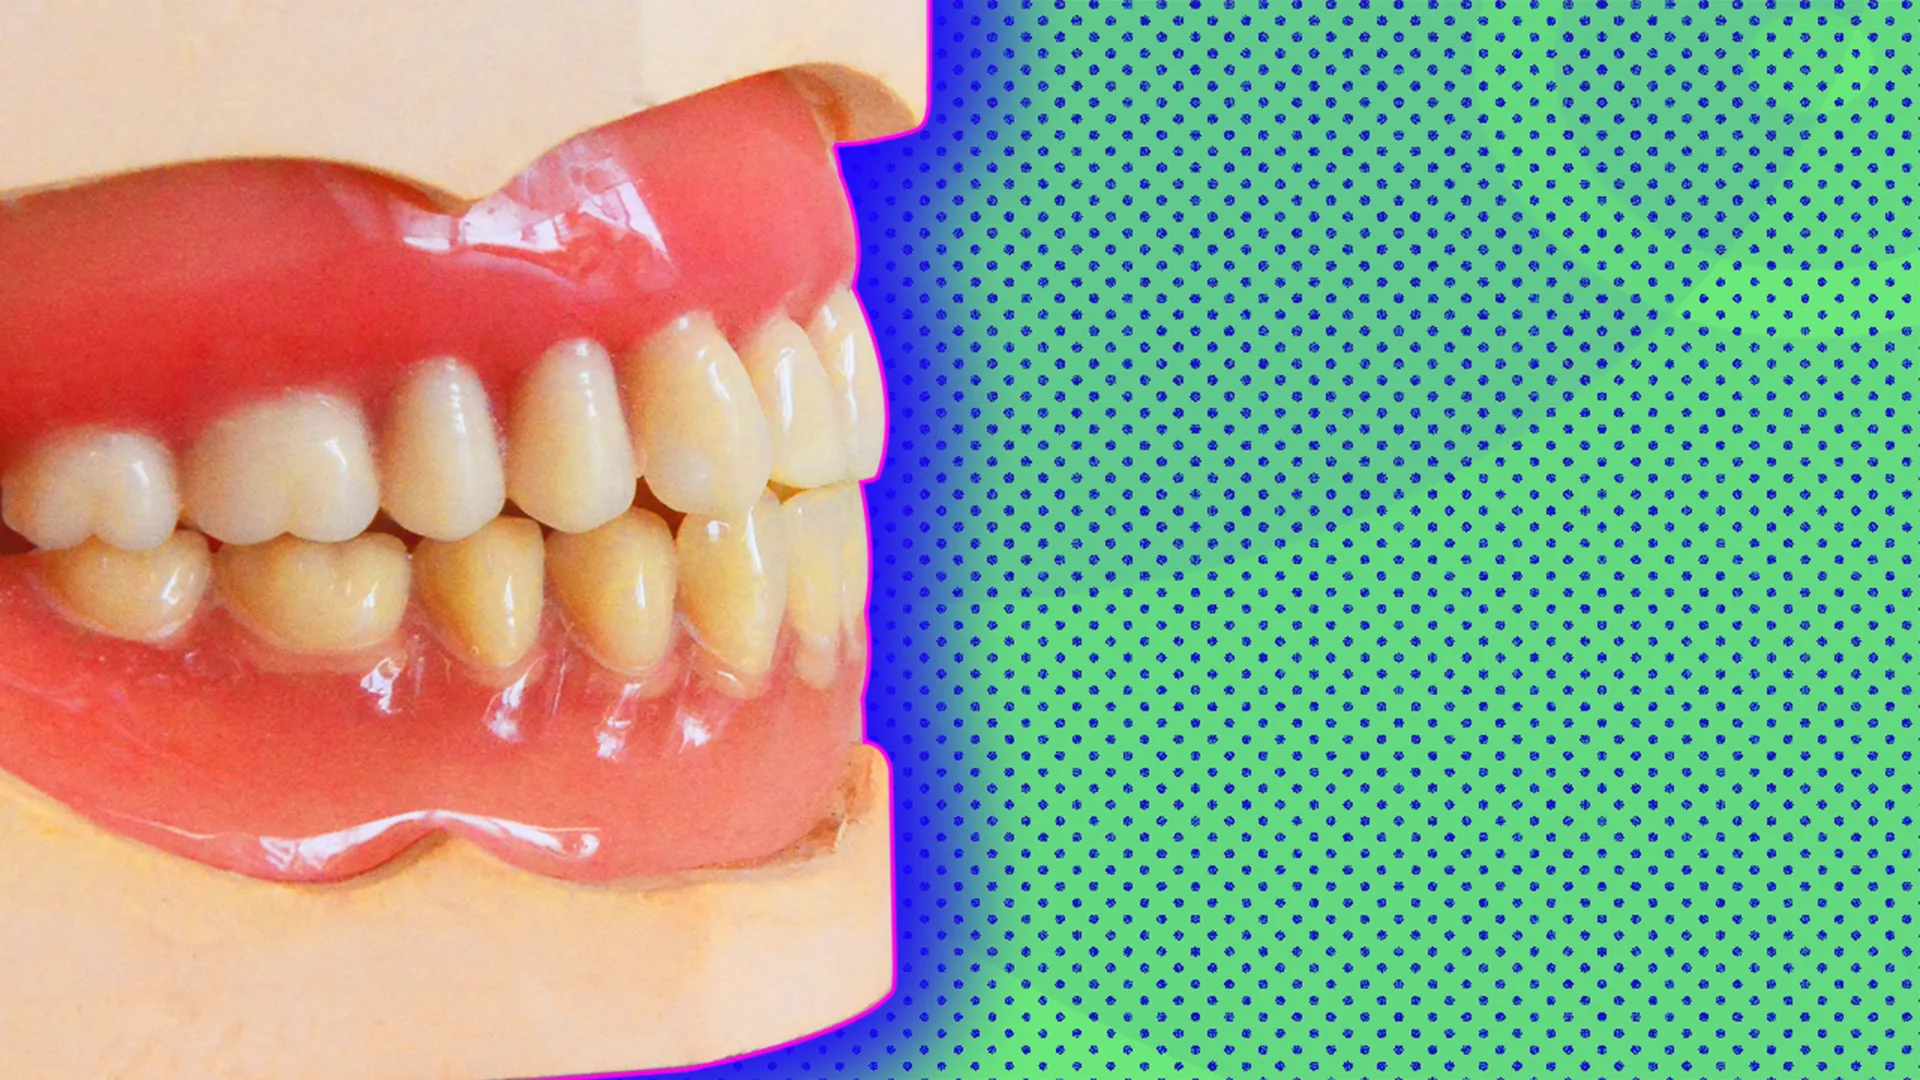 Flase teeth with a polkadot background and a glow around the image